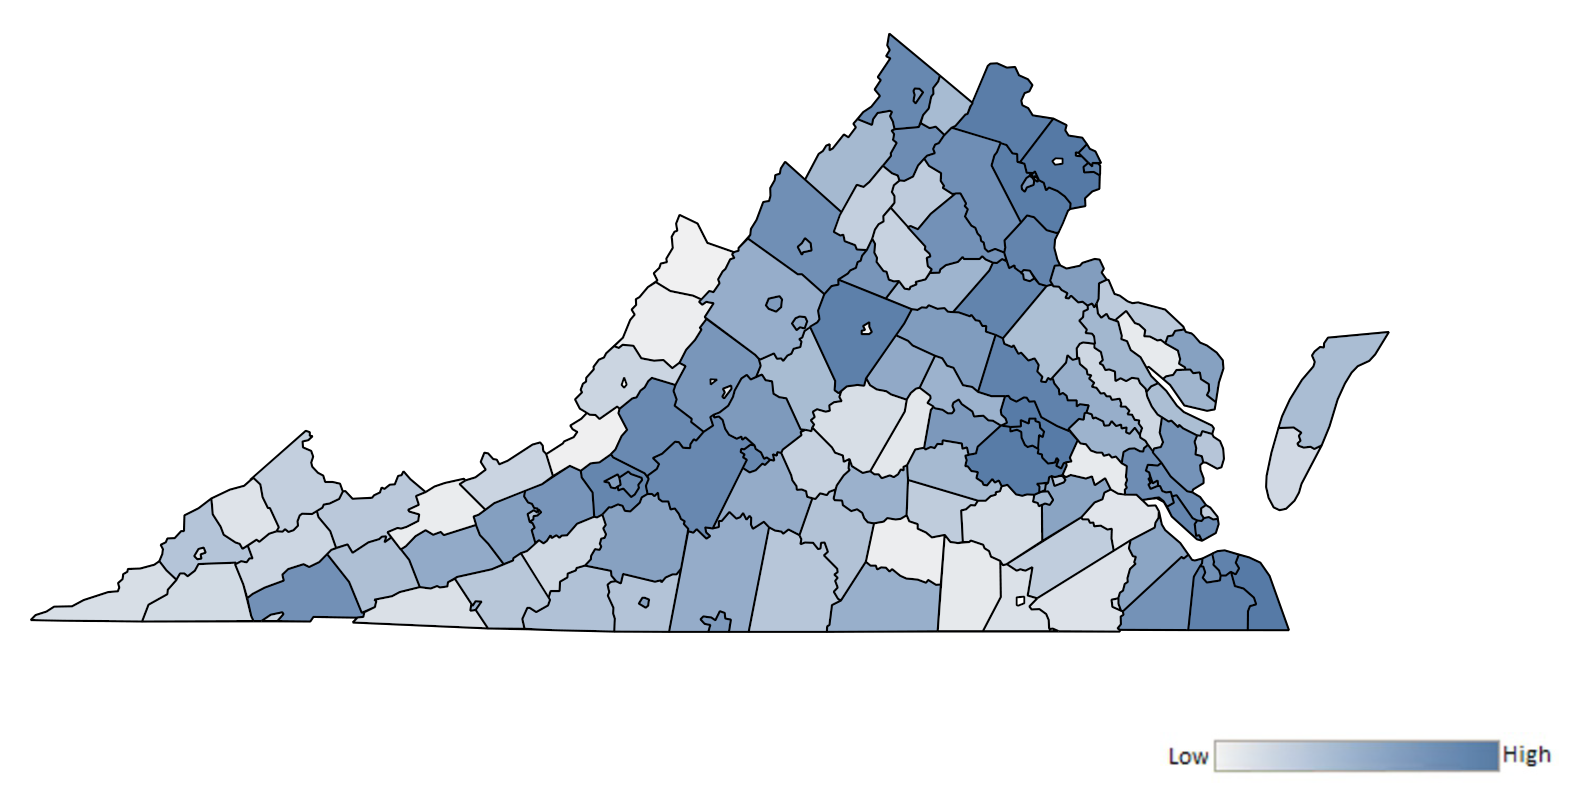 Map of Virginia counties indicating relative number of complaints from low to high. See attached CSV file for complaint data by jurisdiction.